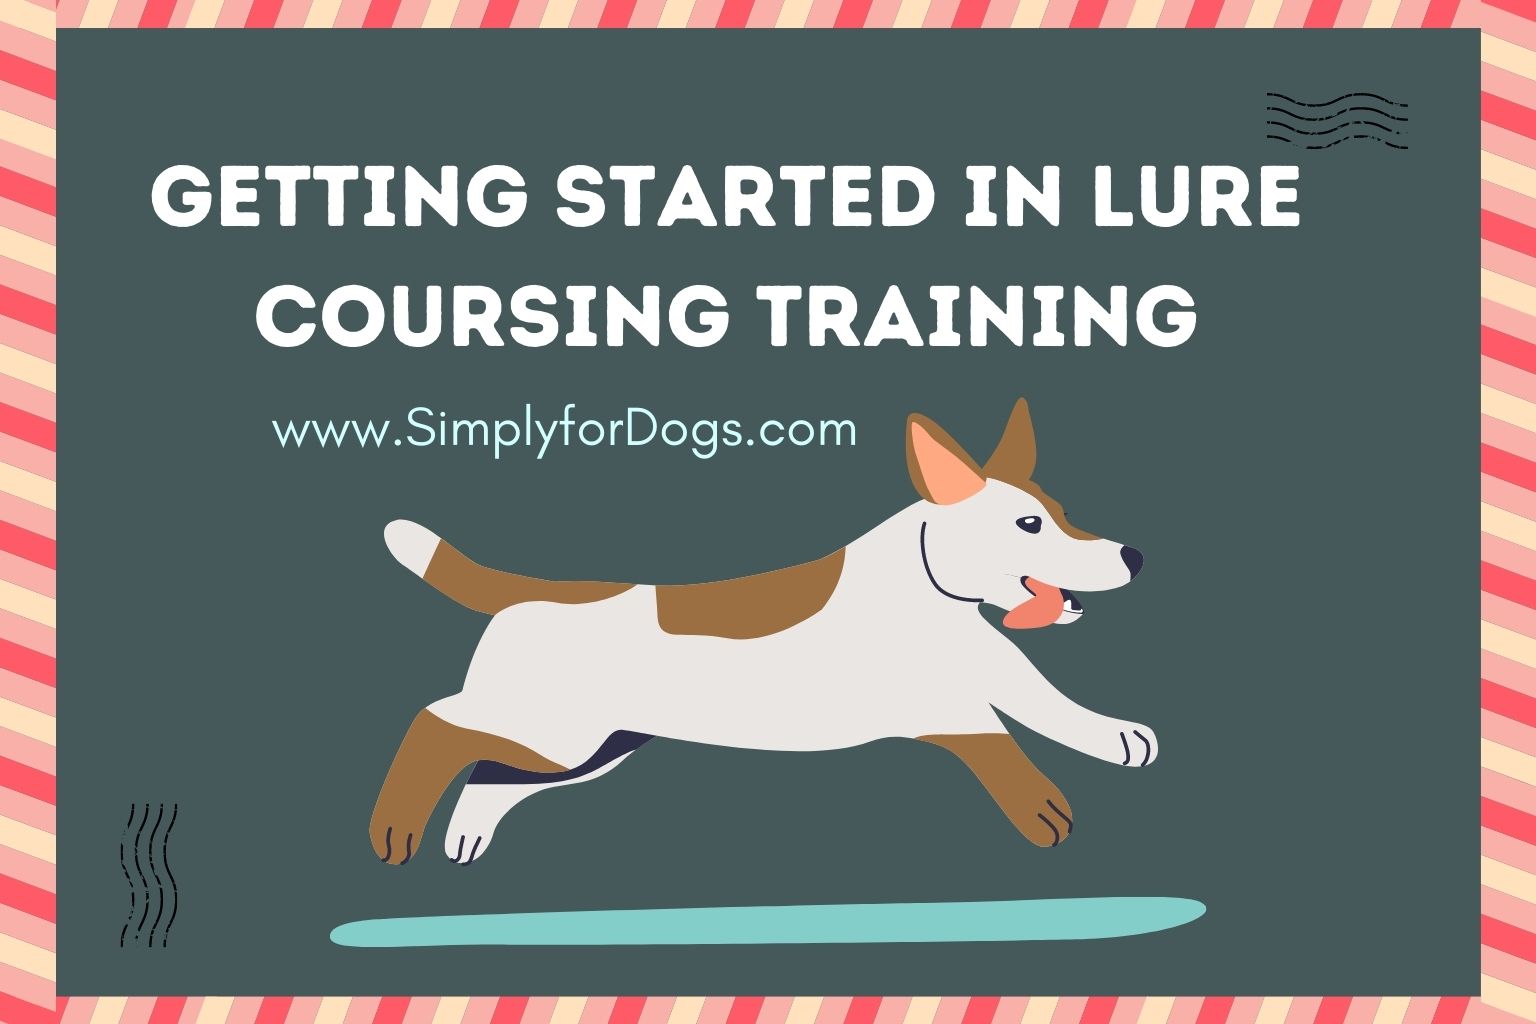 Getting Started in Lure Coursing Training